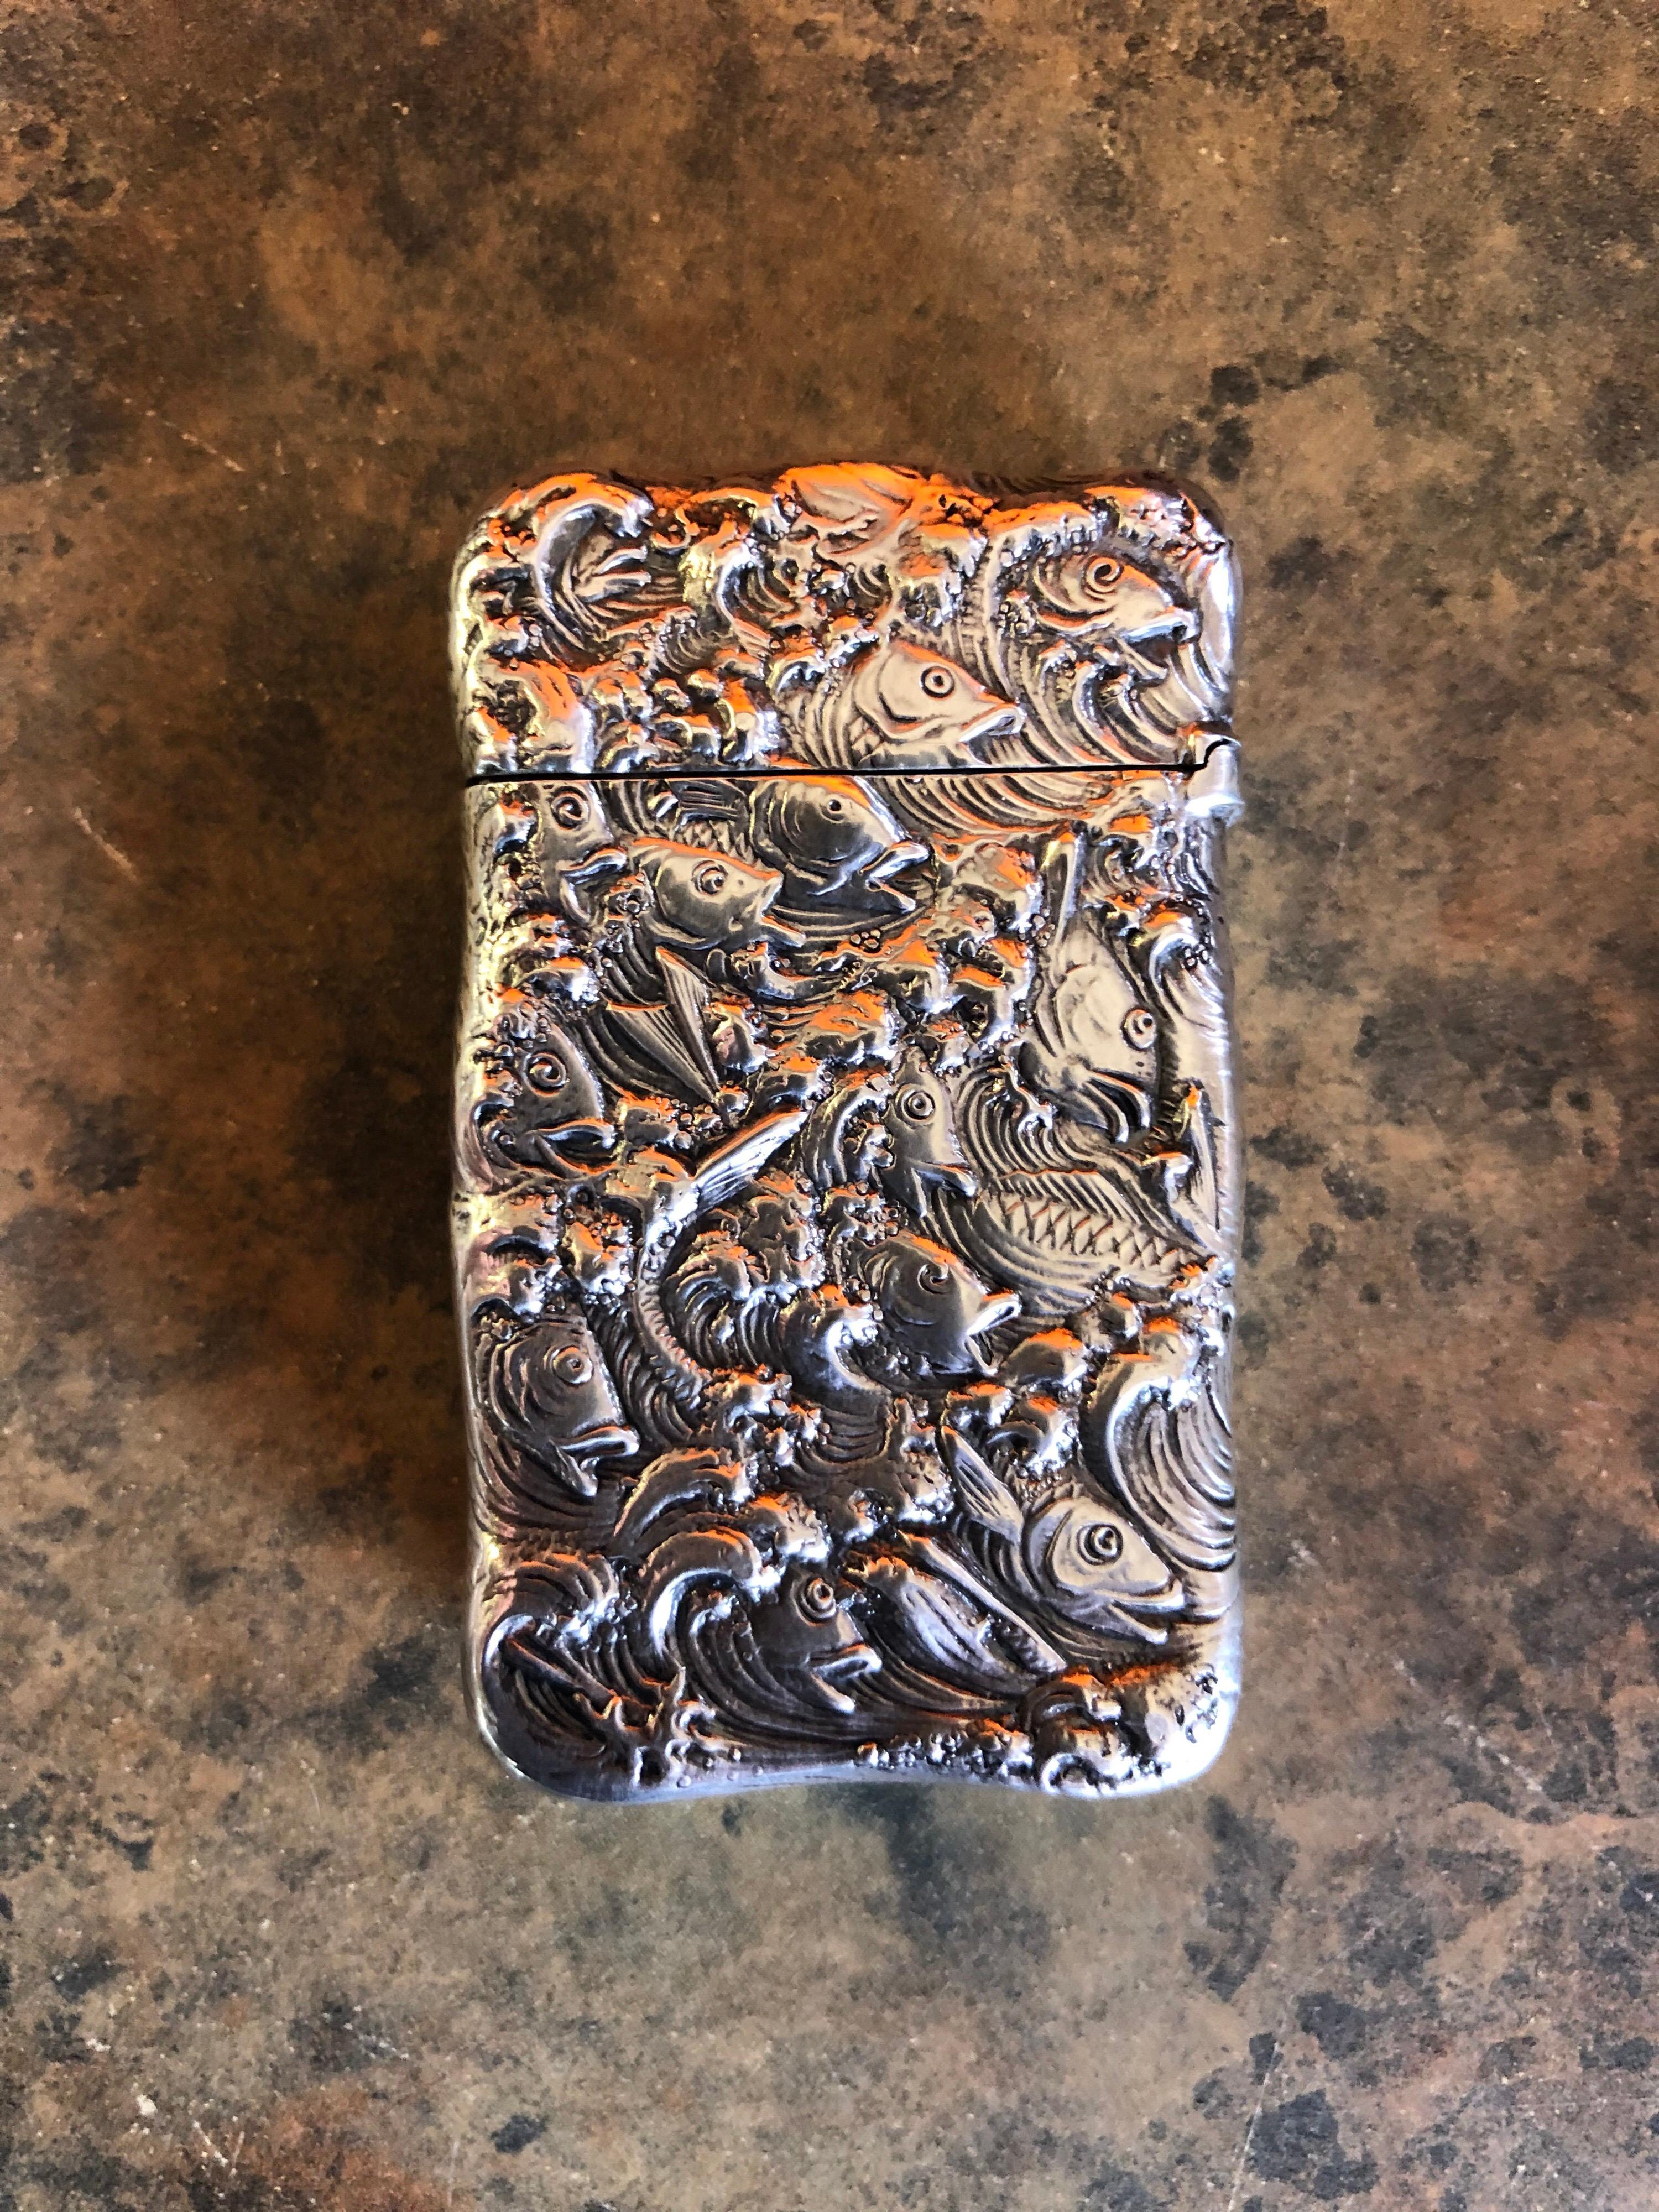 American sterling silver repousse match safe / vesta with an ornate all-over fish design on both sides, circa 1900s. The match holder measures 2.5